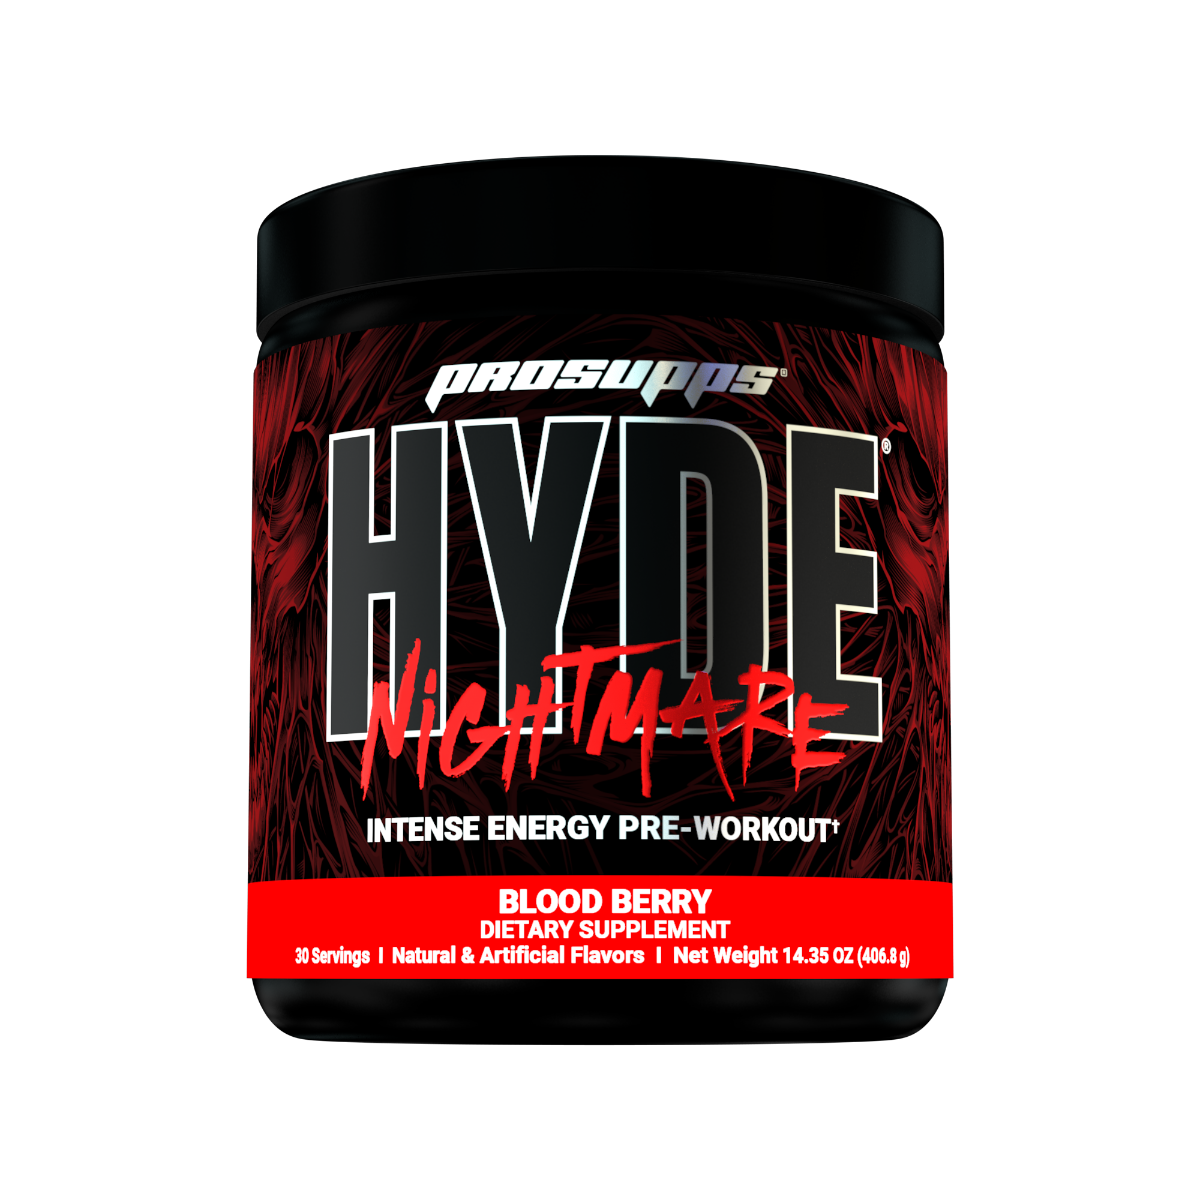 E-shop Hyde Nightmare - Prosupps blood berry	 312 g